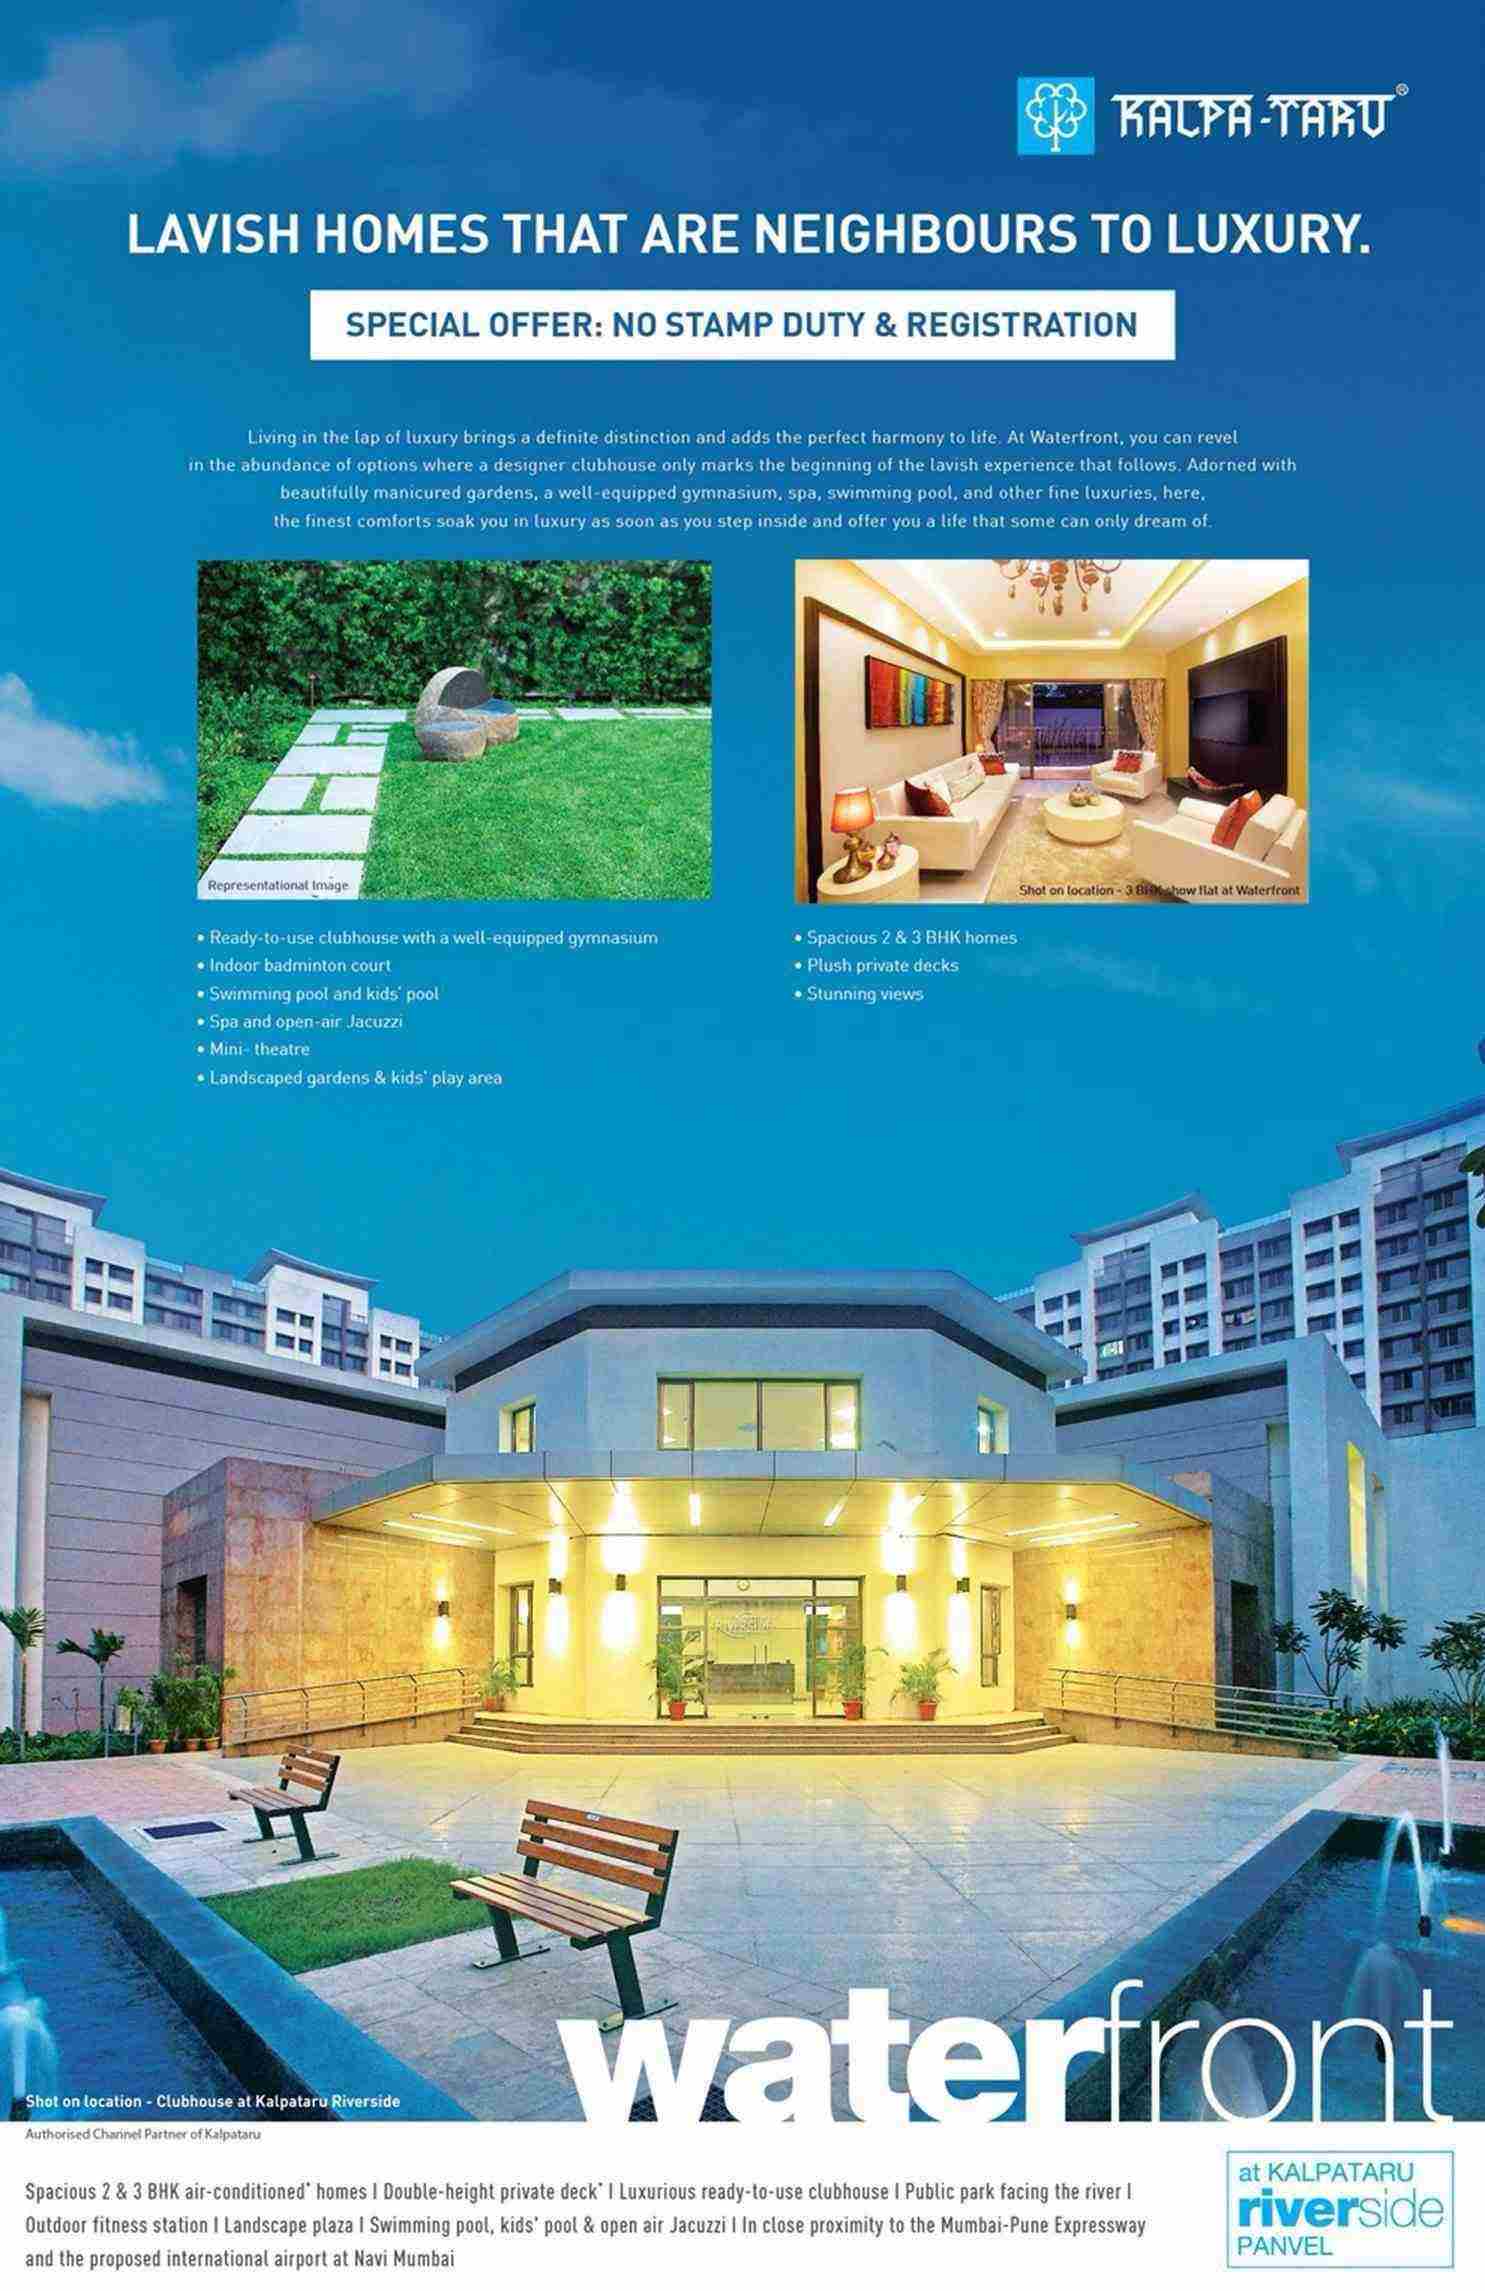 Live in lavish homes that are neighbours to luxury at Kalpataru Waterfront in Mumbai